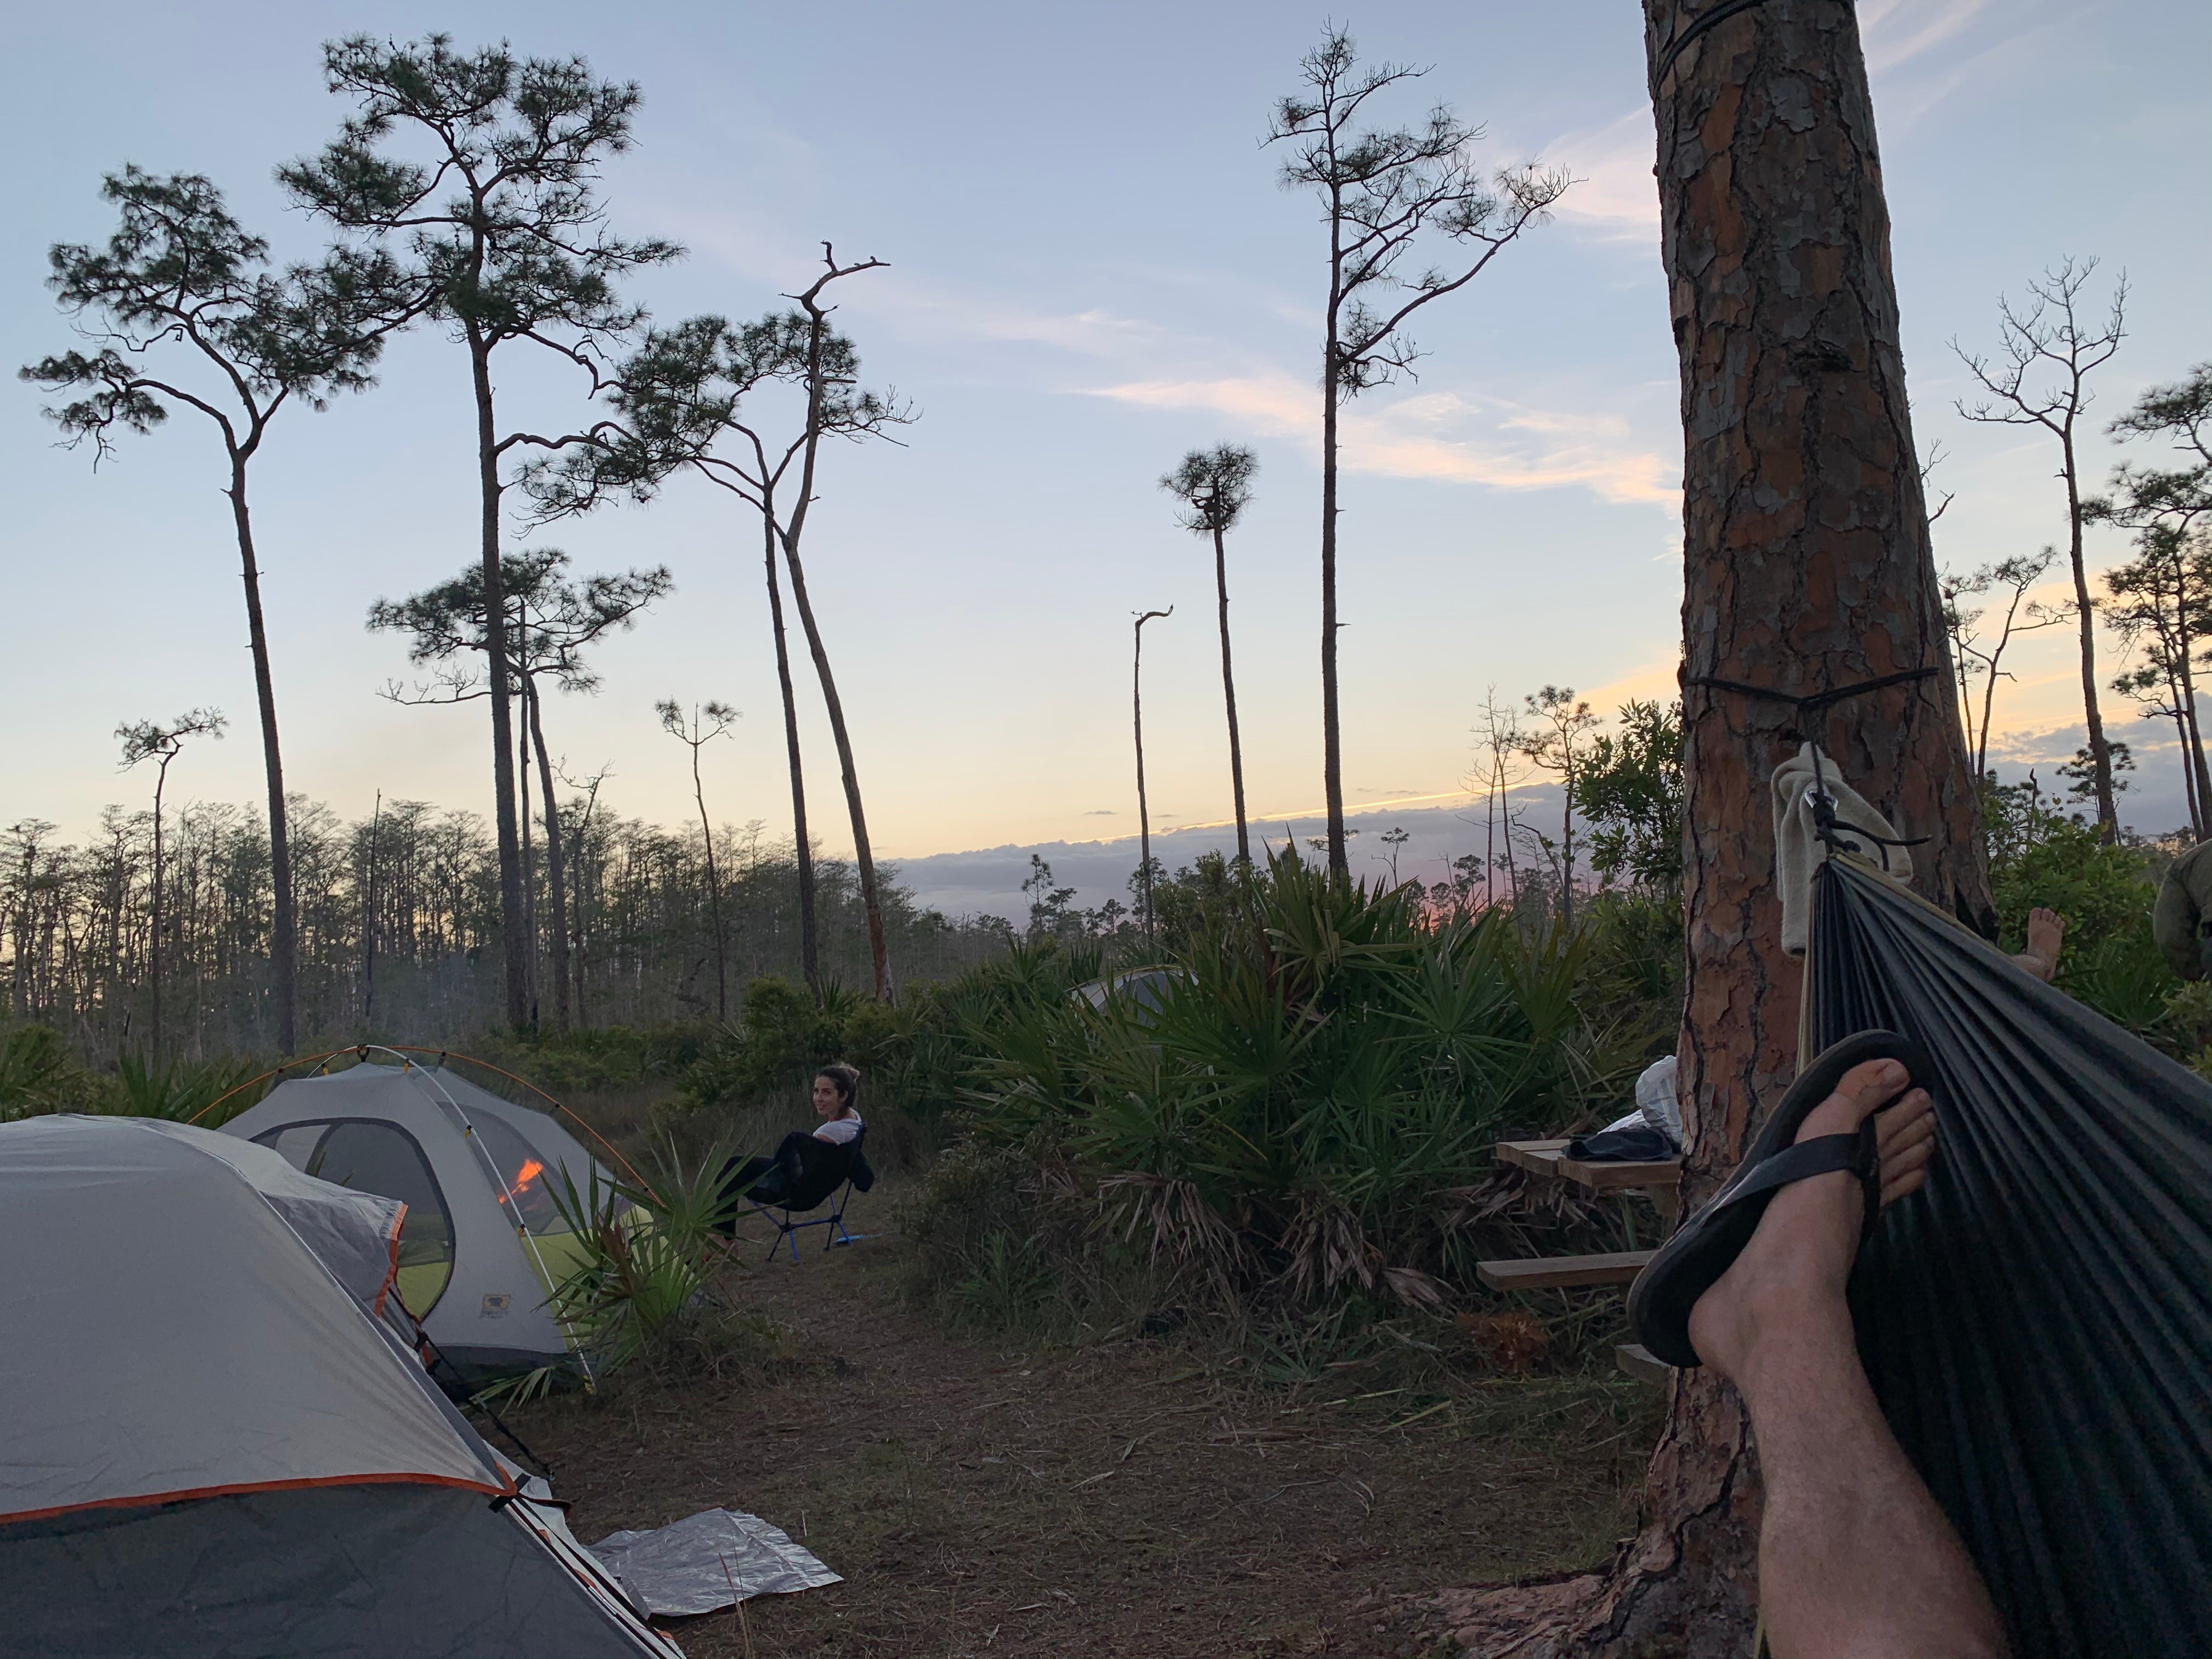 Camper submitted image from Seven Mile Camp on the Florida Trail - 5